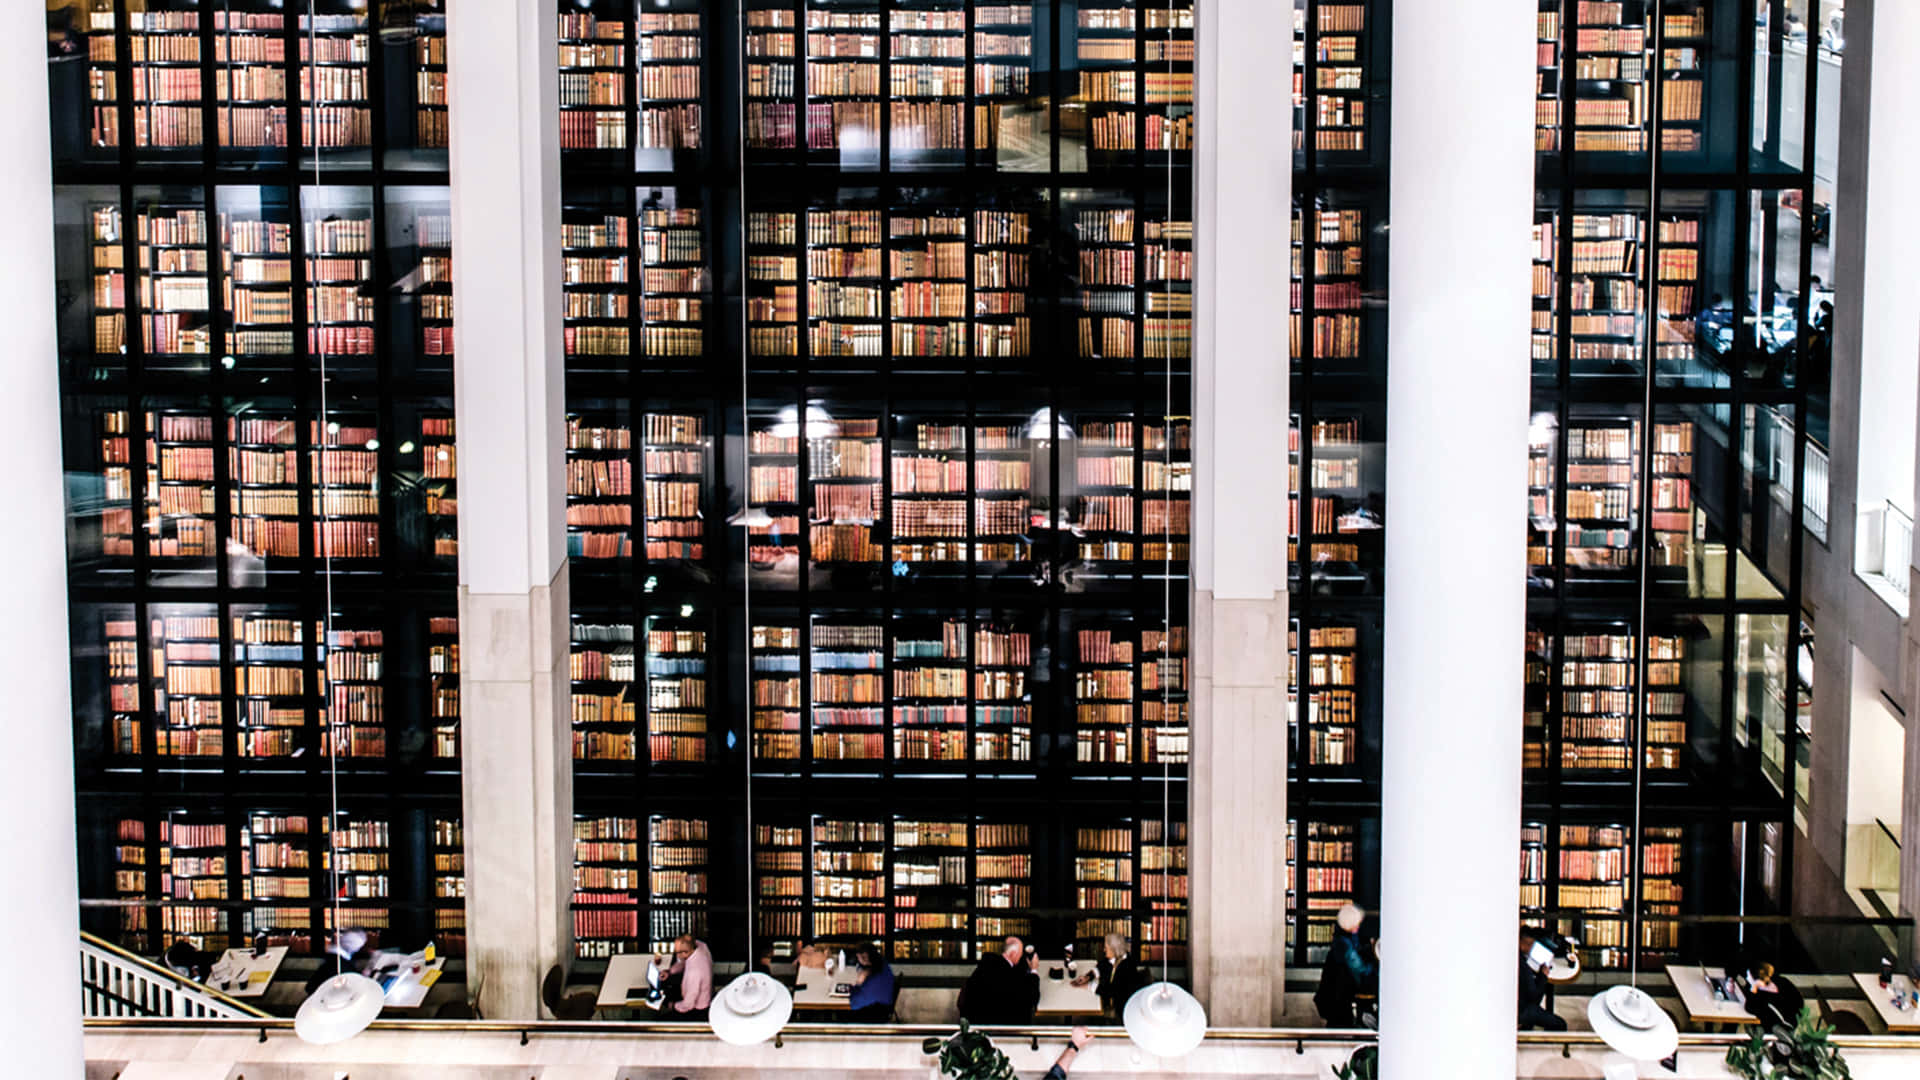 A Large Library With Many Books